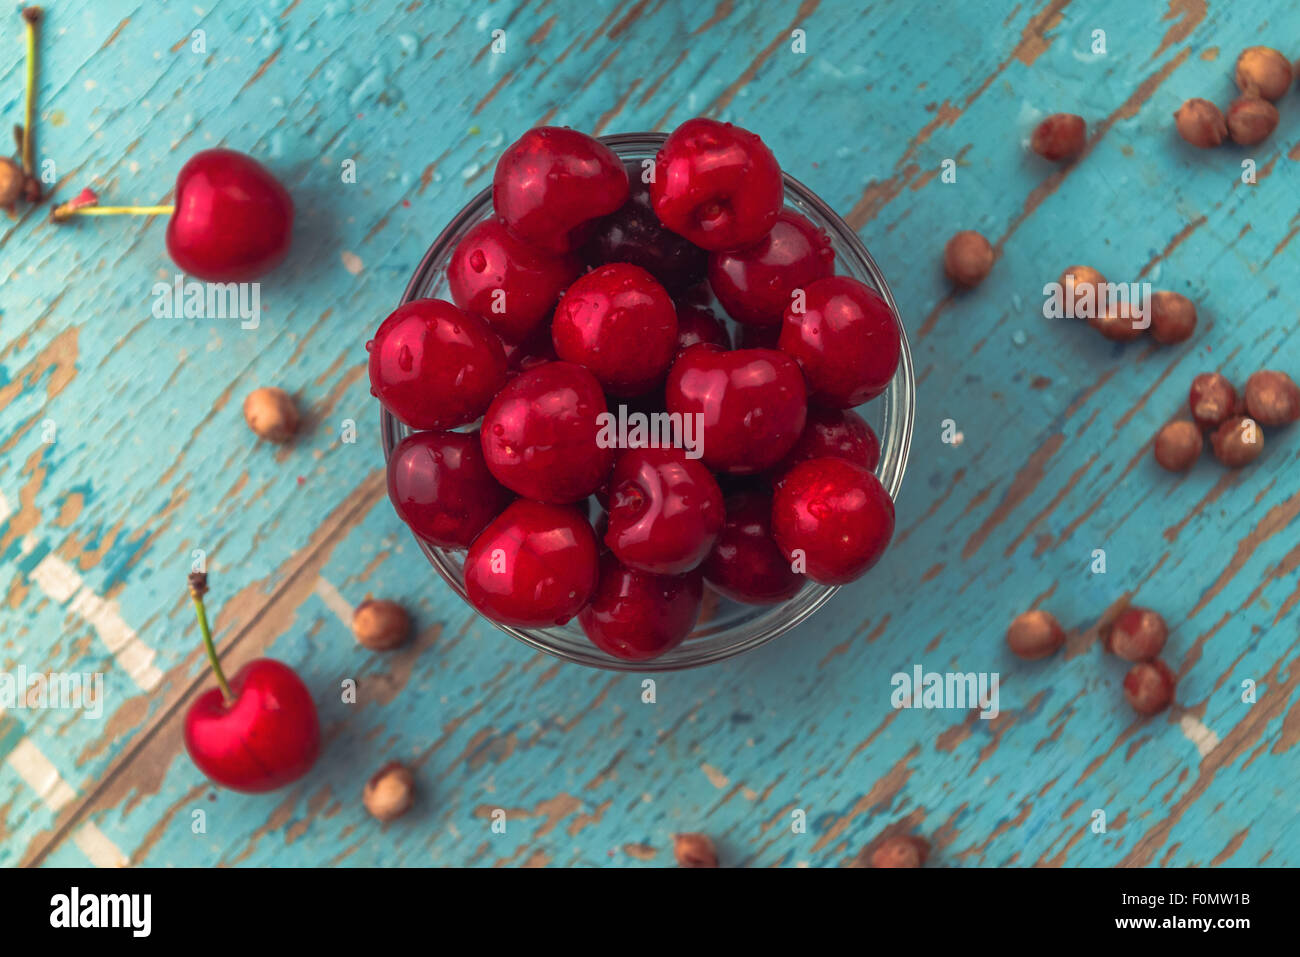 Sweet Cherry in Bowl on Rustic Table, Ripe Fresh Wild Cherries Fruit, Top View Stock Photo